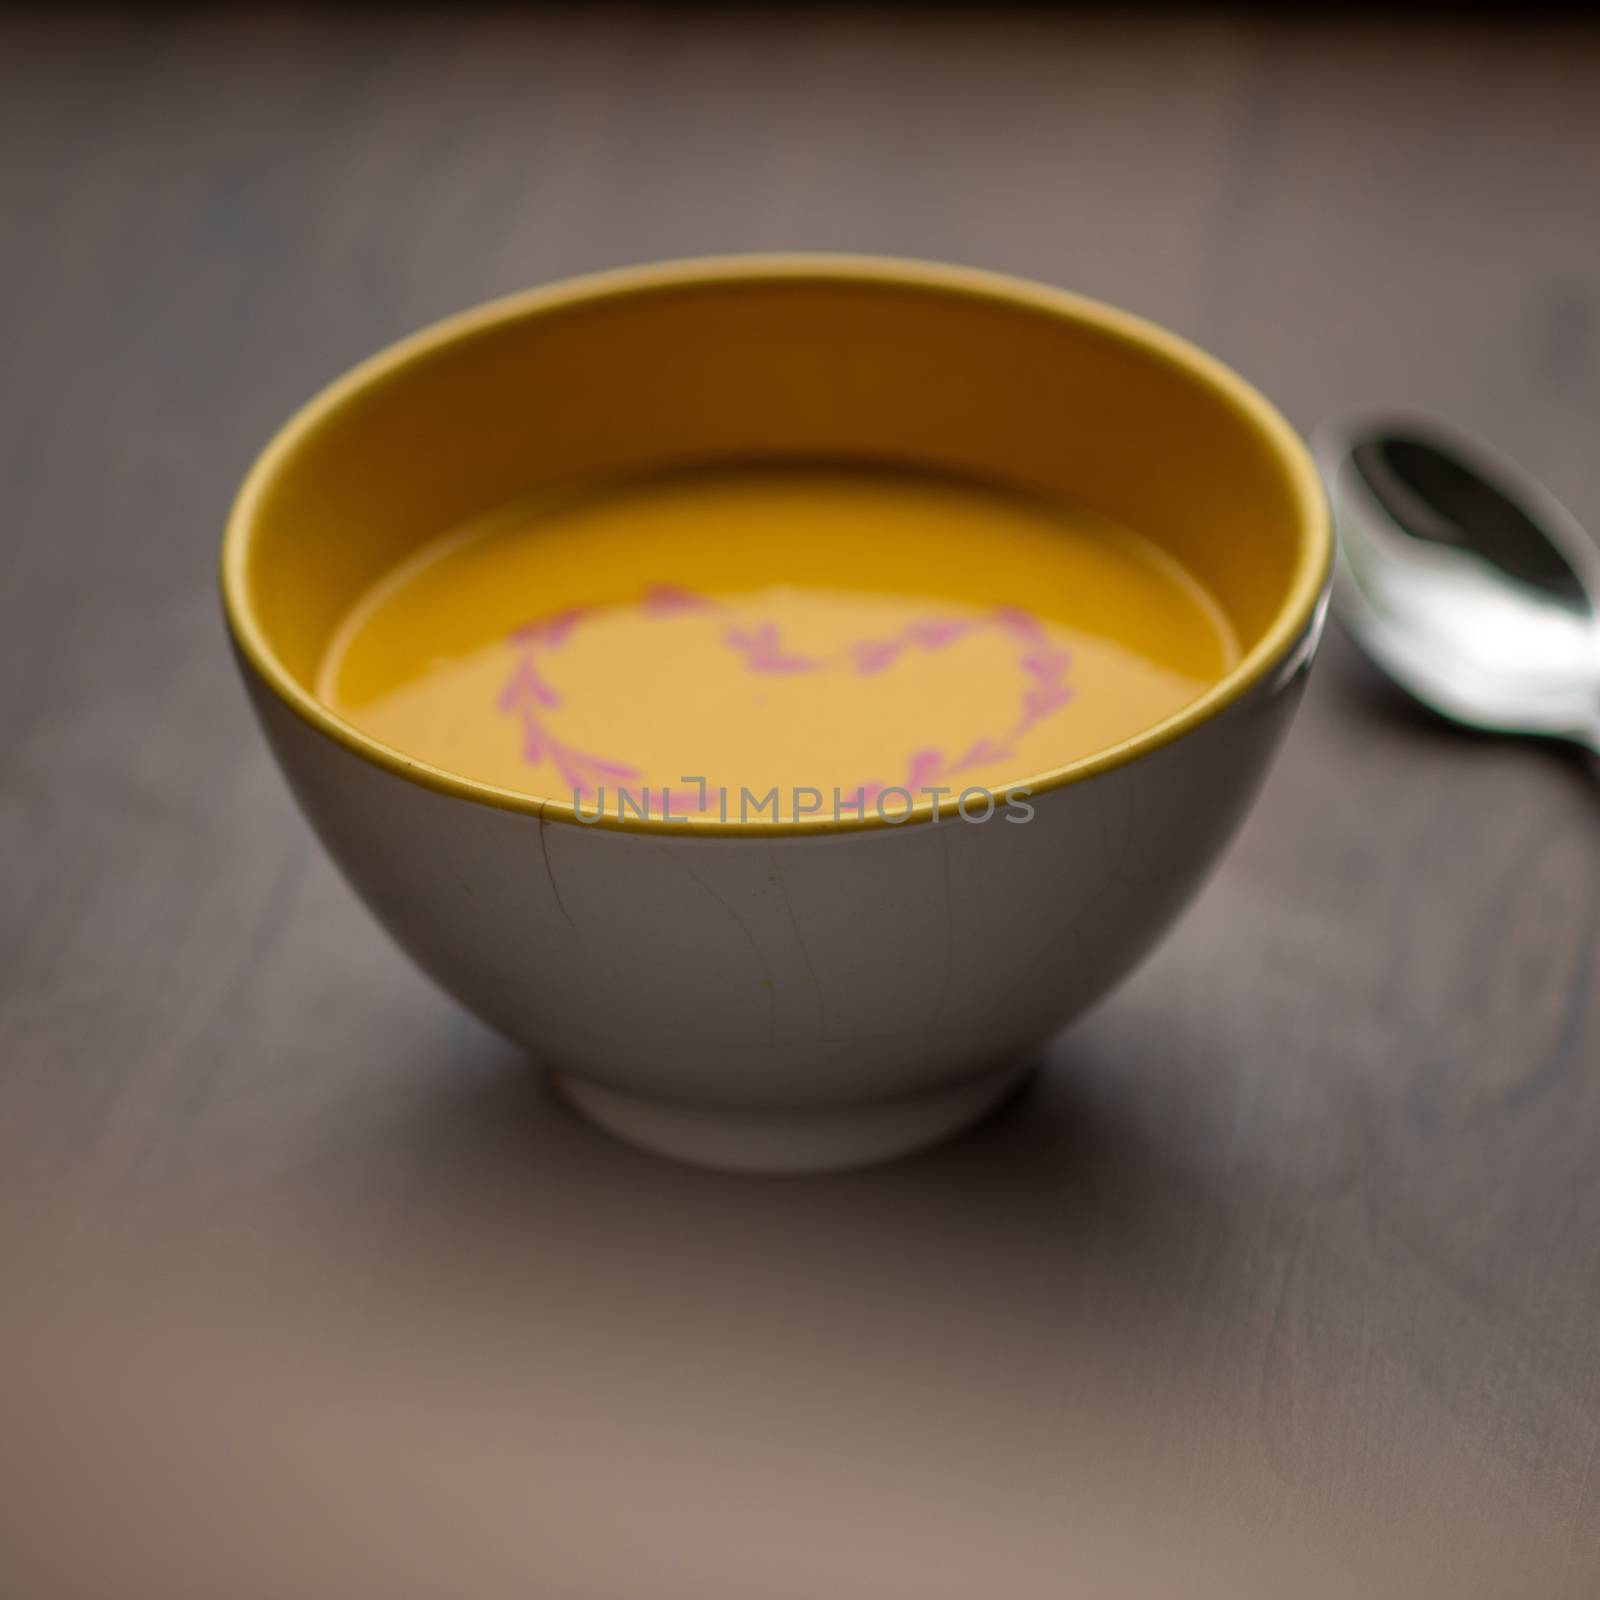 Vegetarian autumn - Pumpkin cream soup with hearth decoration on wooden table